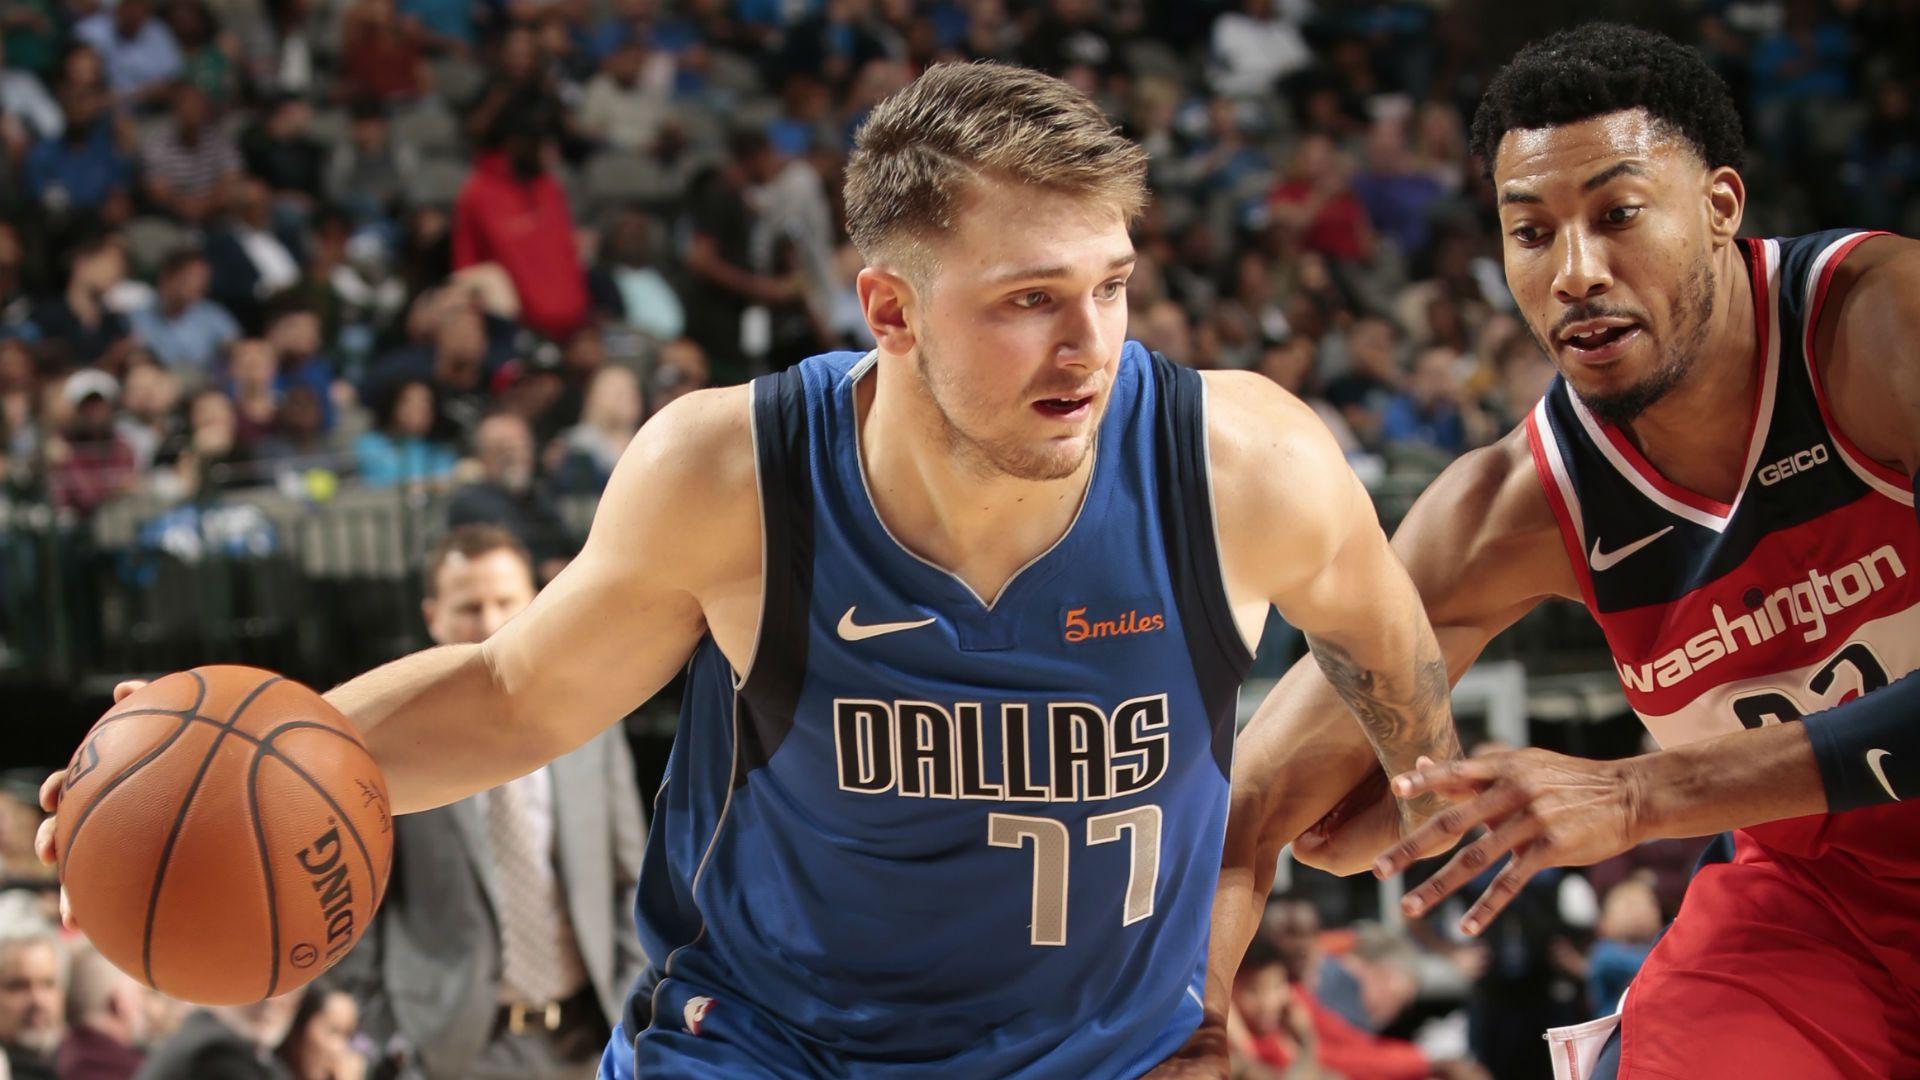 Heat Check: Does Luka Doncic Deserve To Be In The 2019 NBA All Star